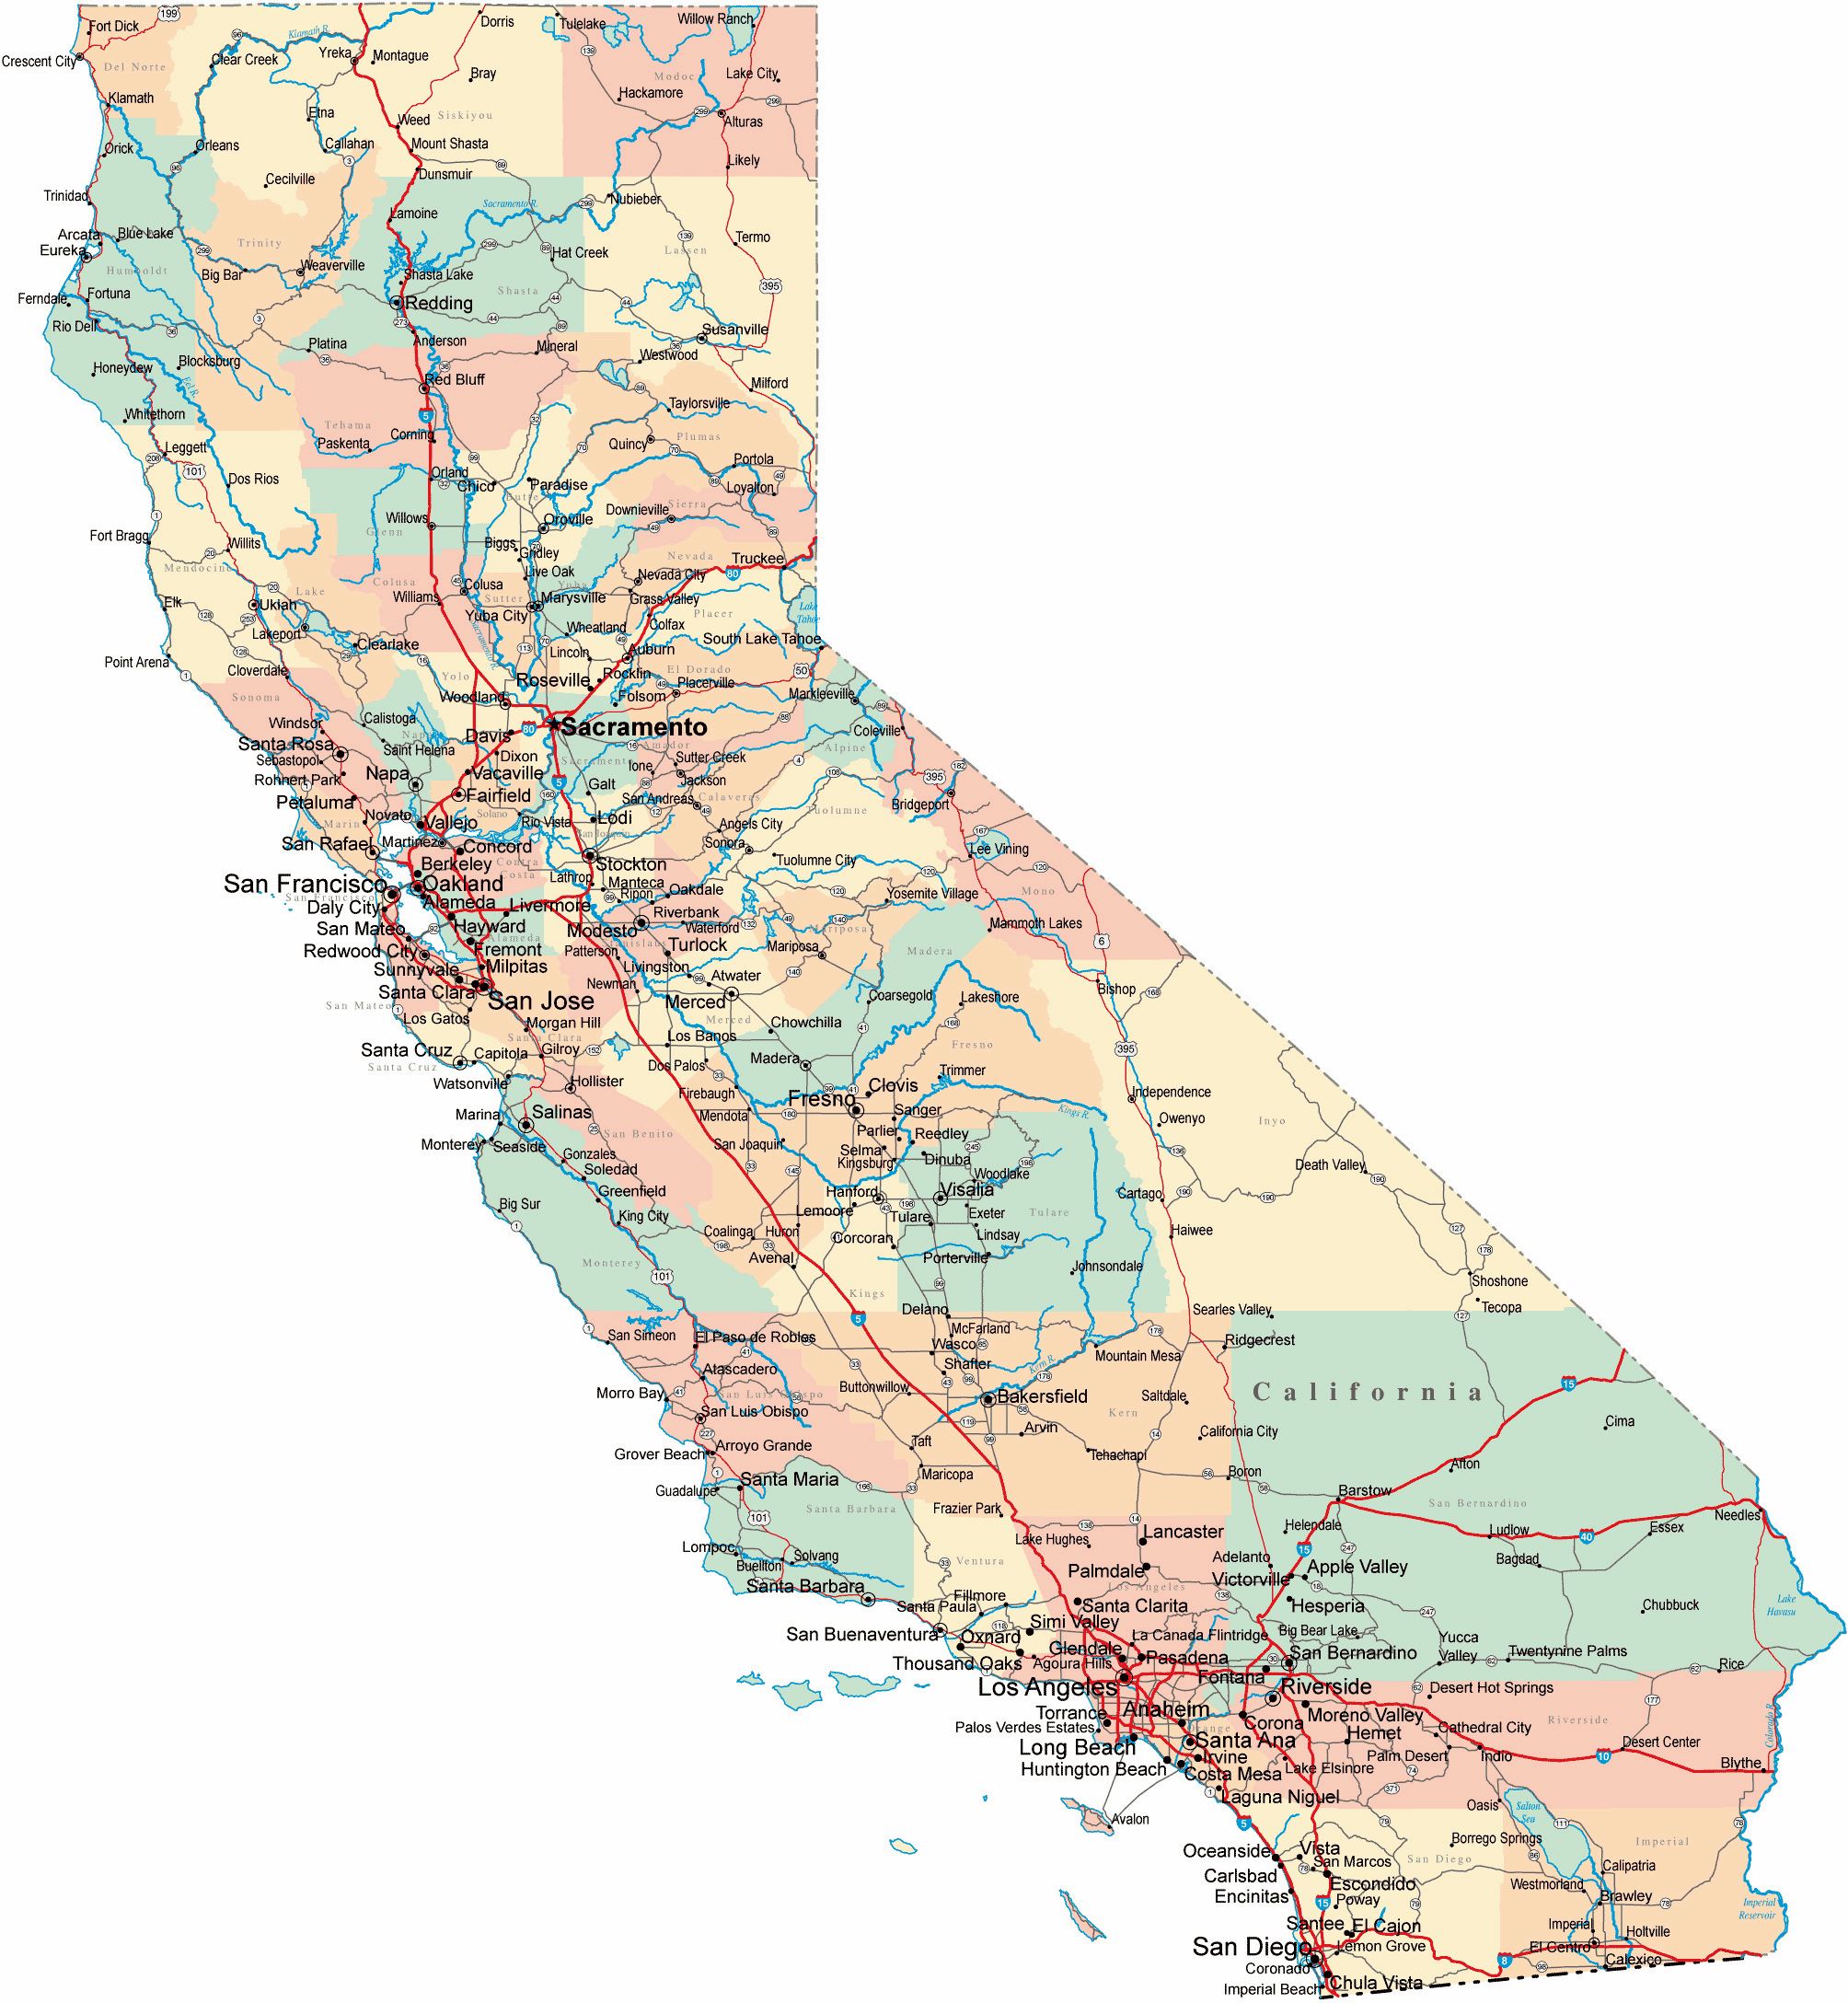 Large California Maps For Free Download And Print High Resolution And Detailed Maps